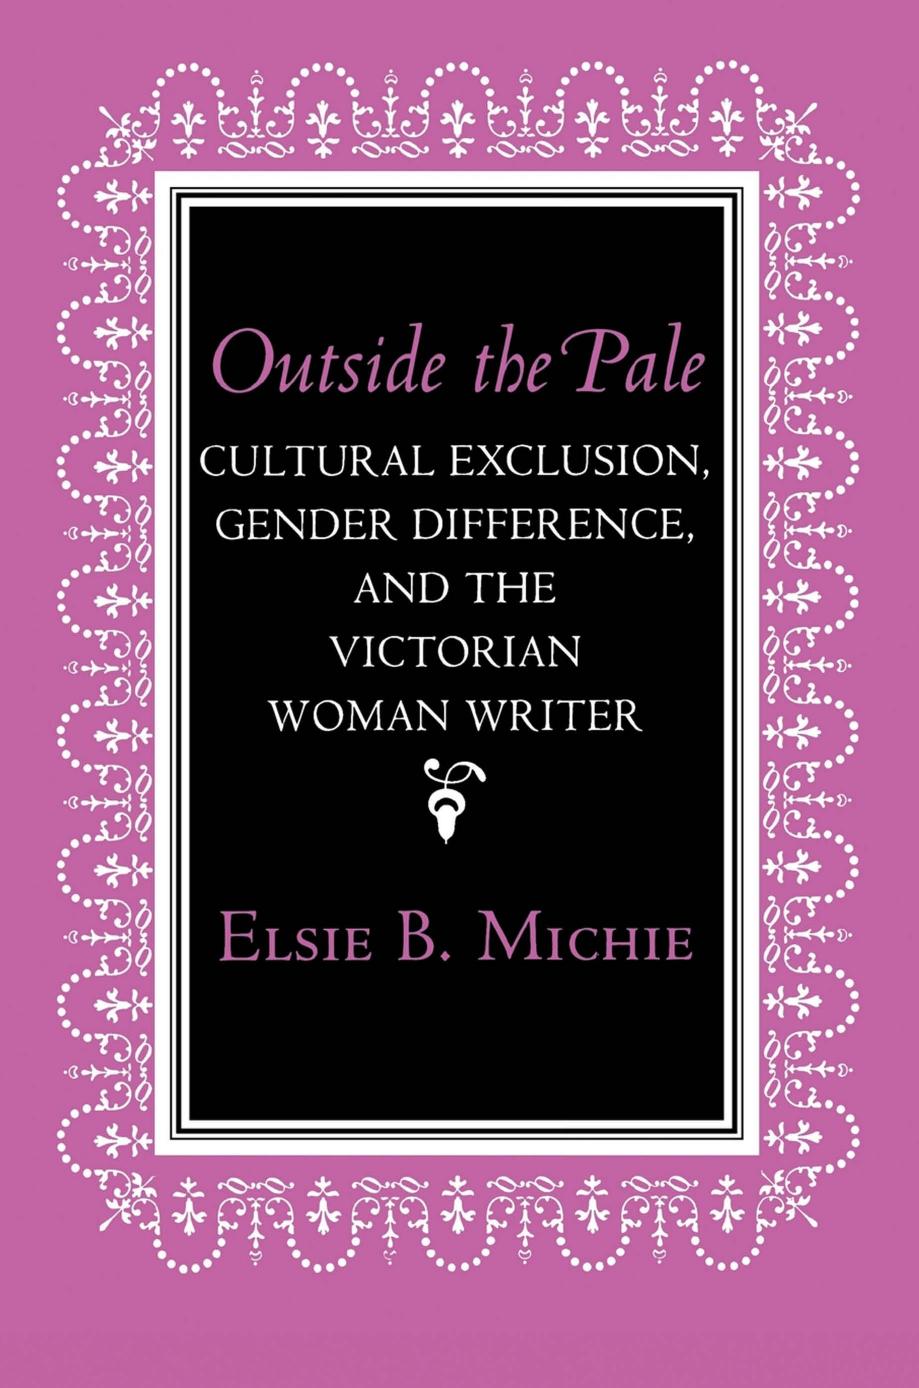 Outside the Pale: Cultural Exclusion, Gender Difference, and the Victorian Woman Writer by Elsie B. Michie